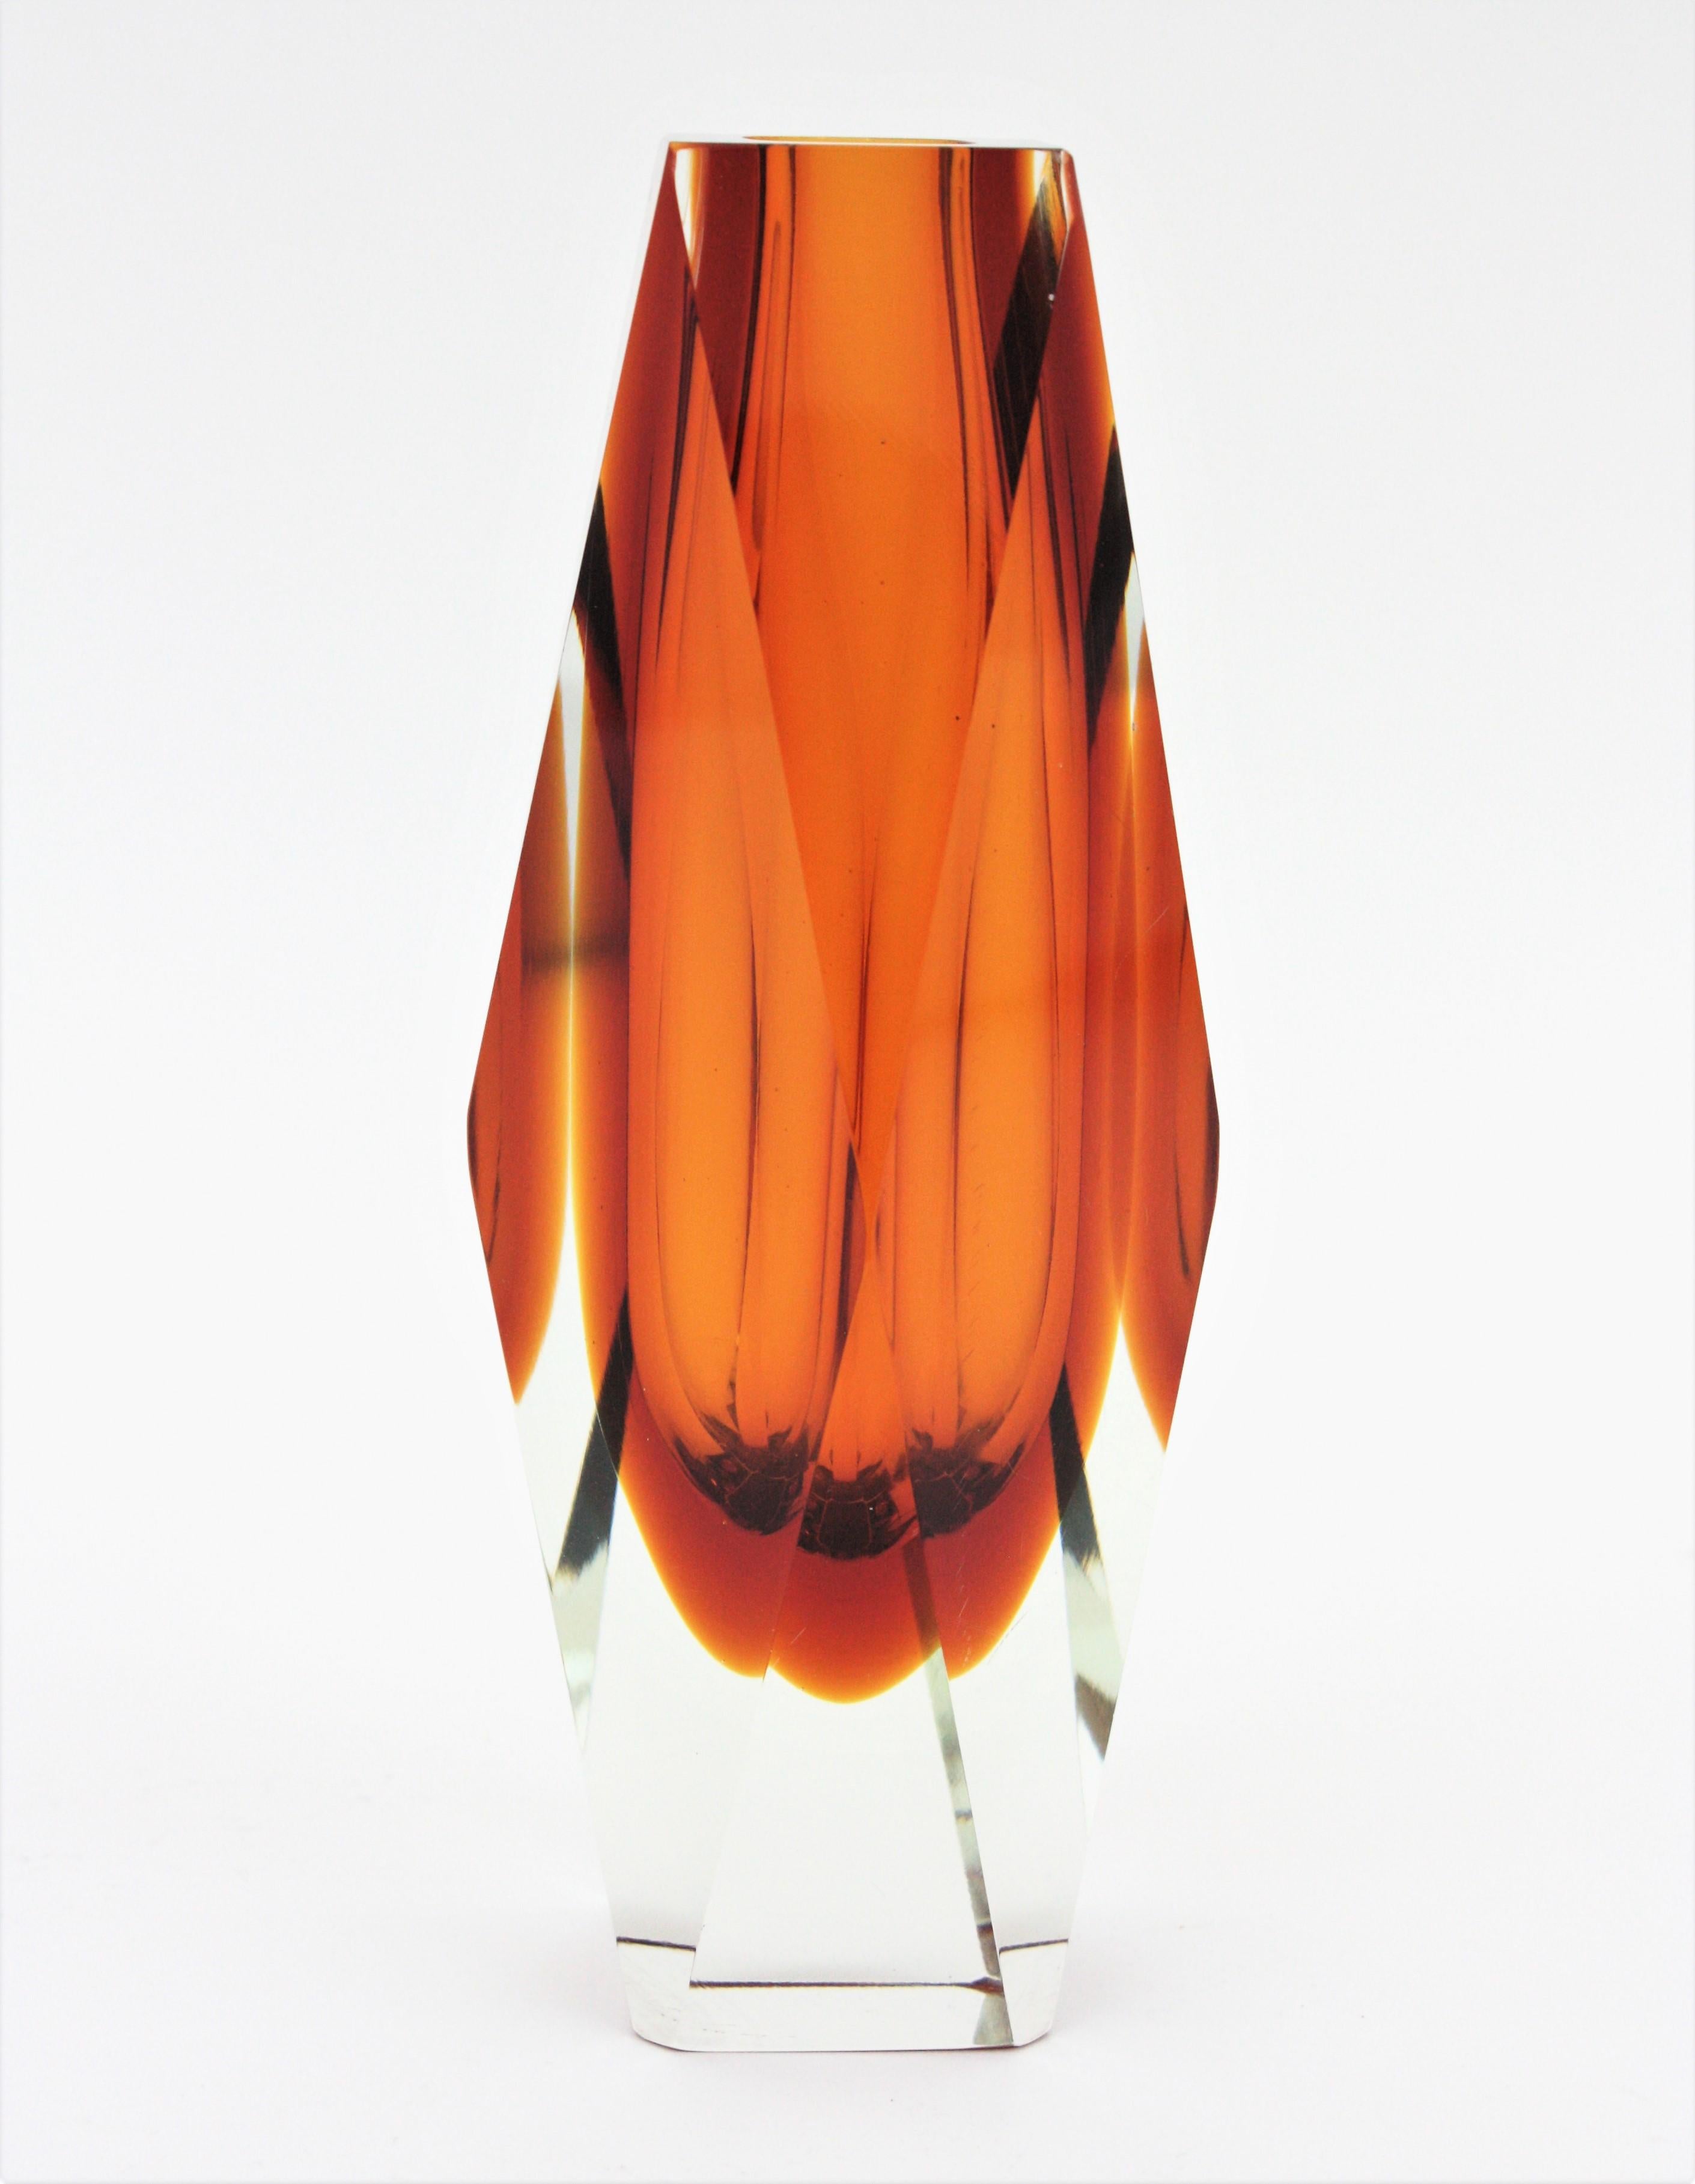 A gorgeous extra large Sommerso faceted orange and clear Murano glass vase. Attributed to Mandruzzato. Italy, 1950-1960.
Faceted Murano glass with sommerso technique in two tons of orange cased into clear glass.
Gorgeous placed as a part of a set